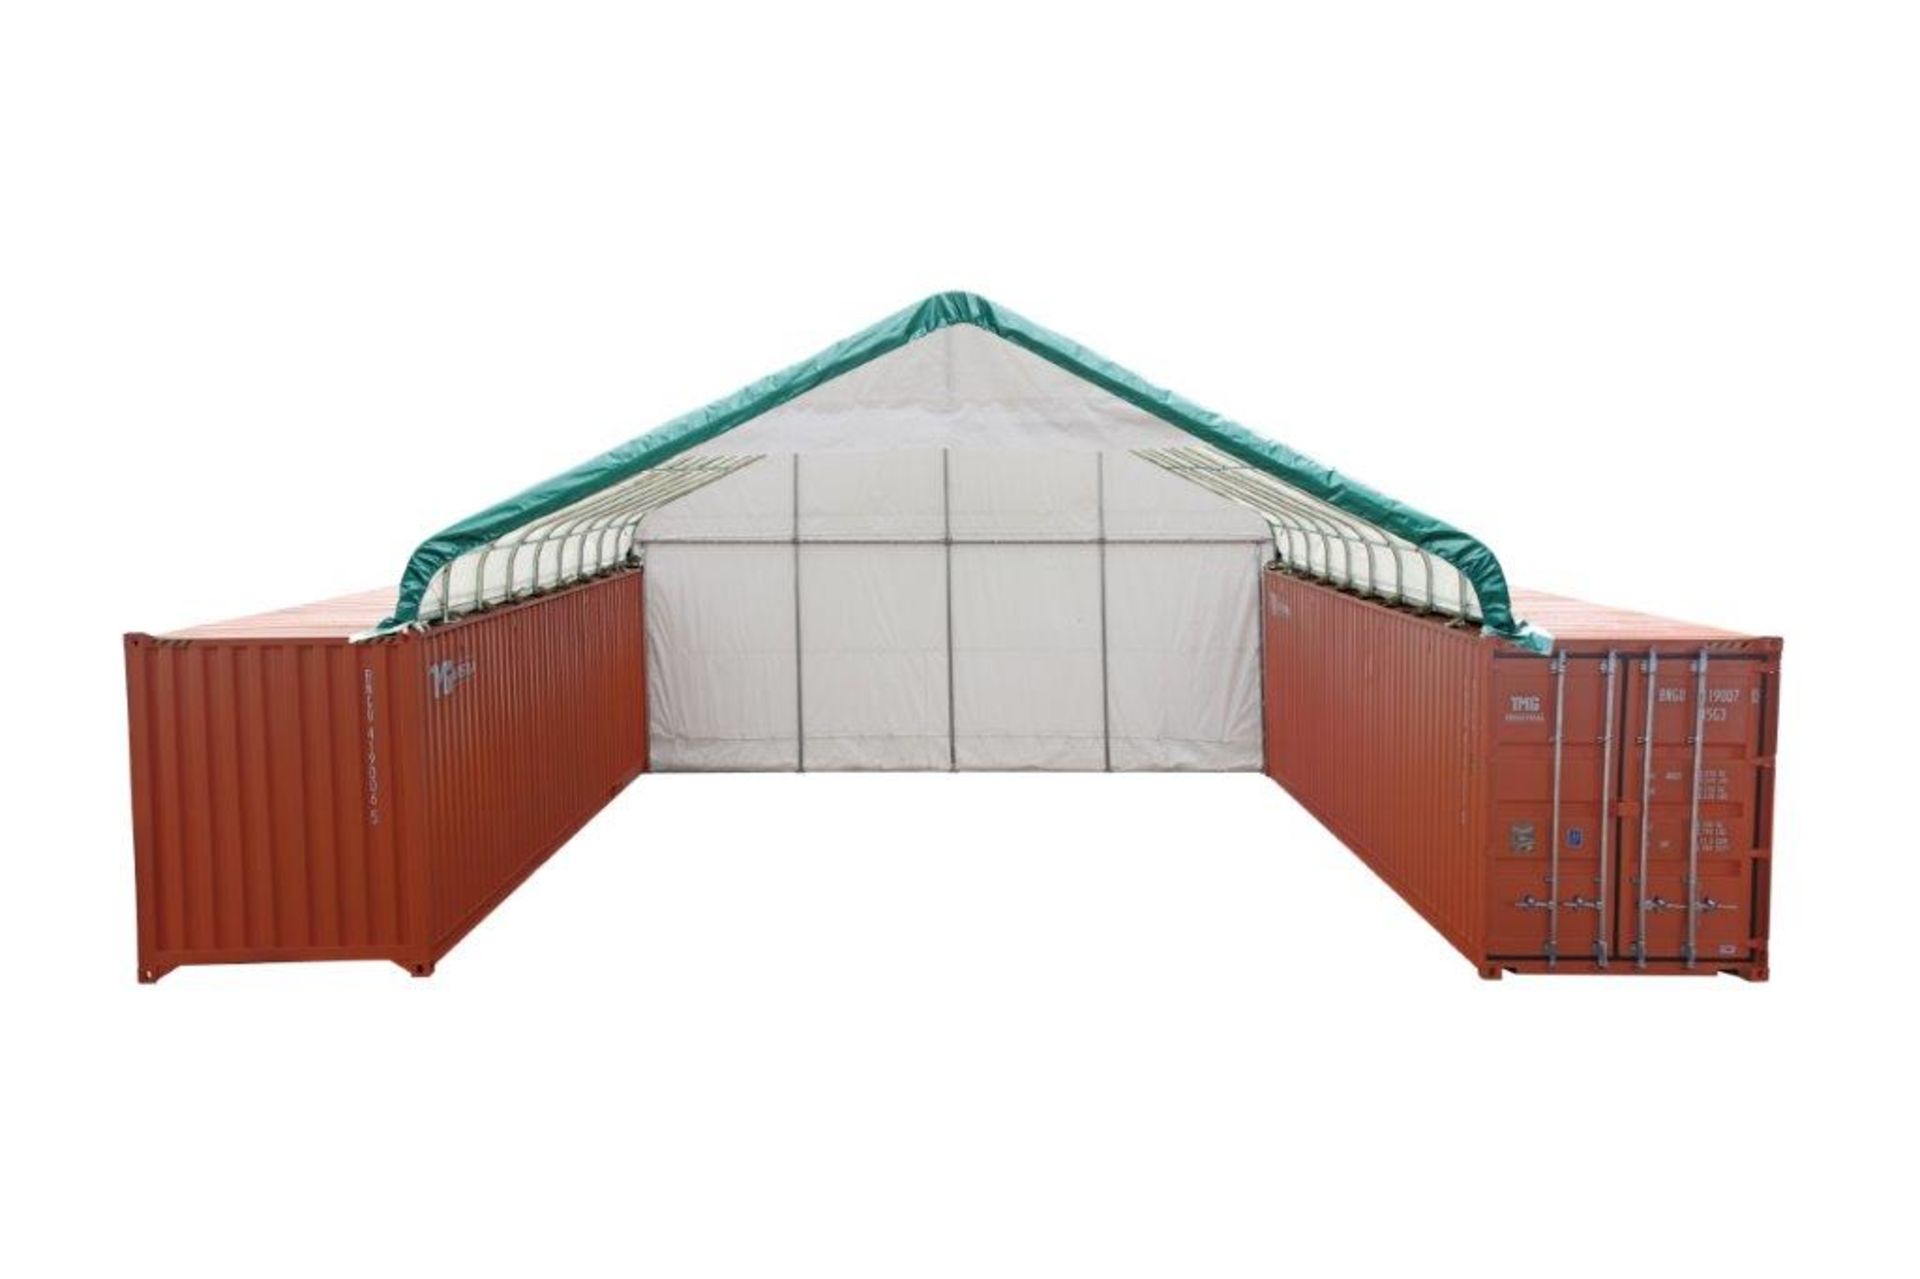 CONTAINER SHELTER 3040C ENDWALL PVC (1.3M) - TMG-ST3040CVF - Image 2 of 5